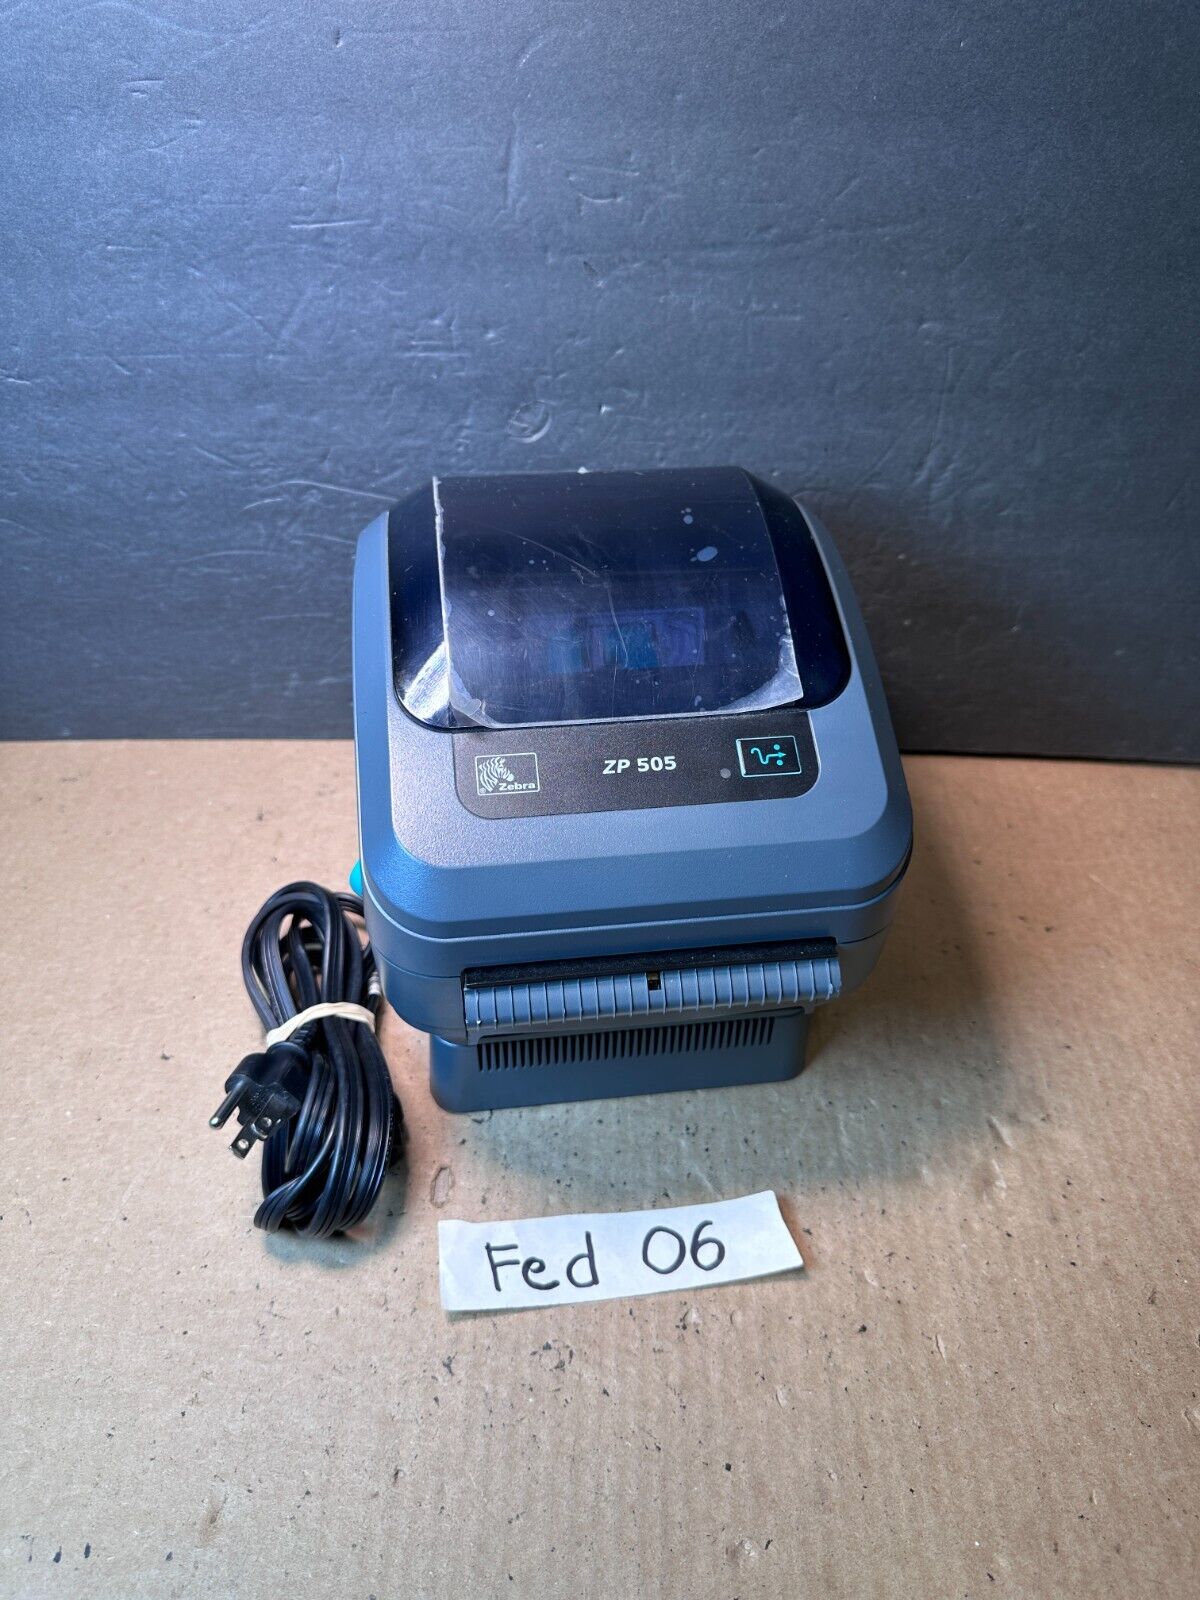 Zebra ZP505 Thermal Label Printer Serial/Parallel With Power Cable Works